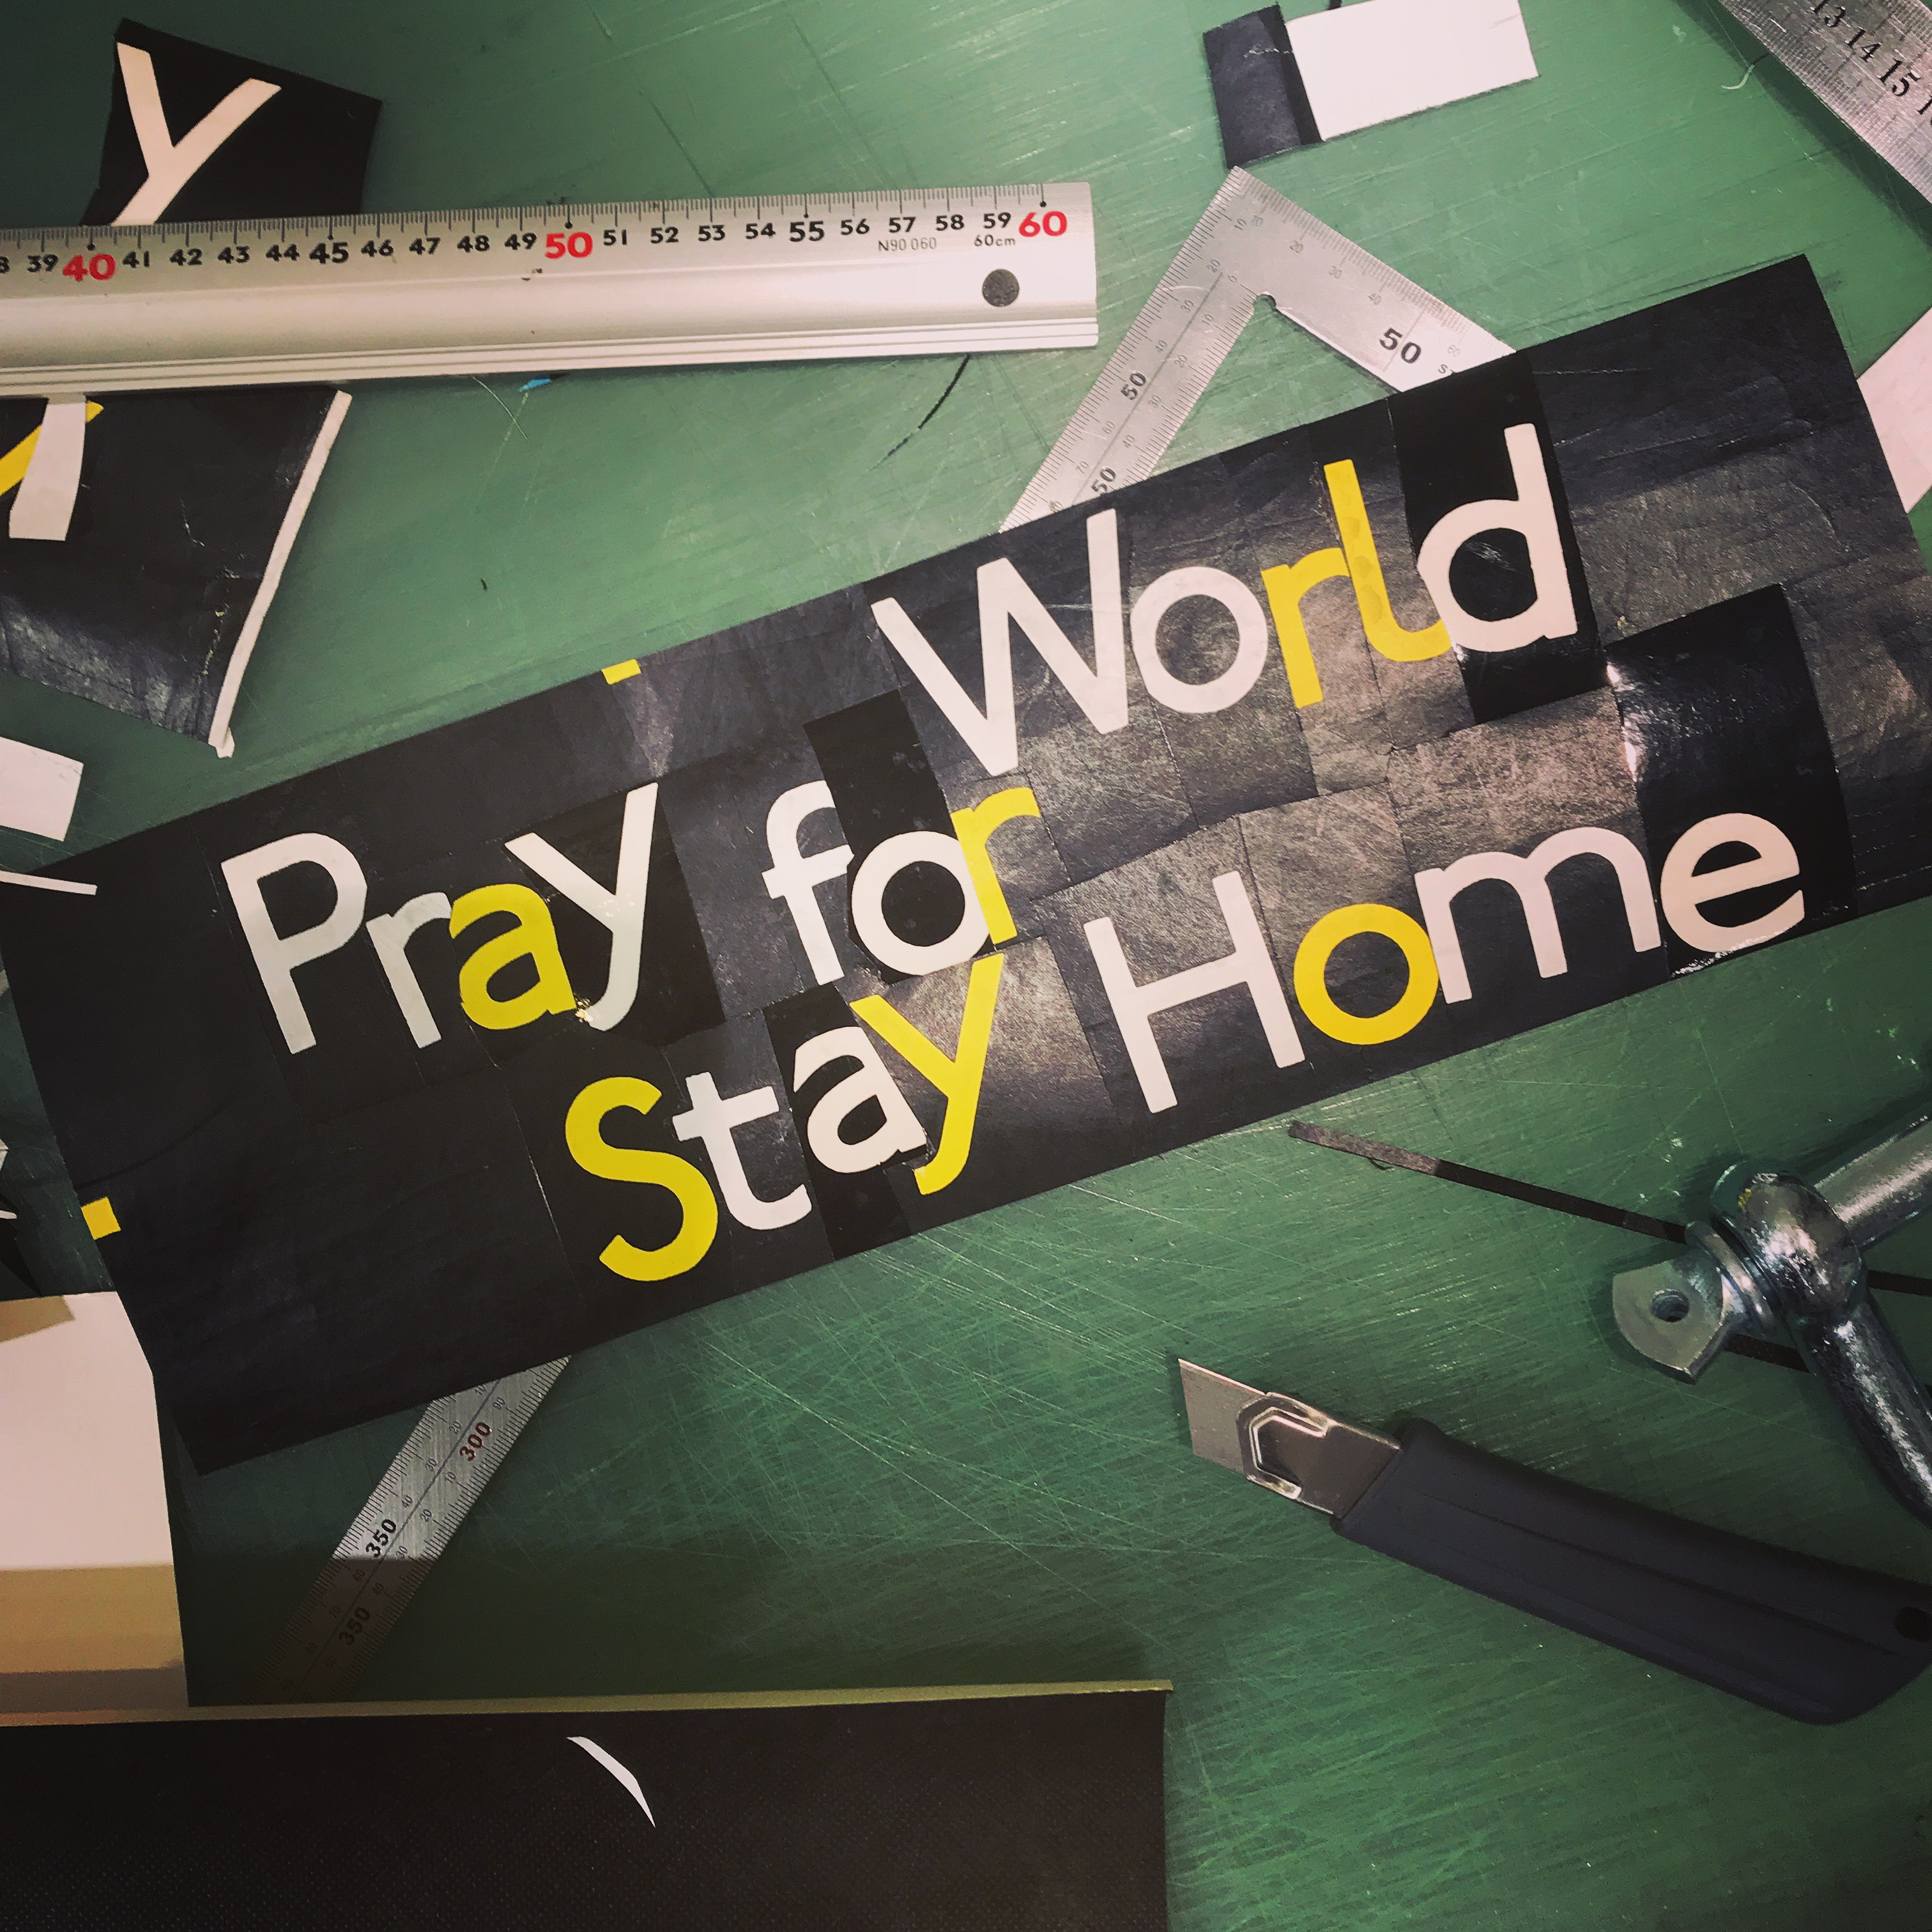 Pray for World Stay Home